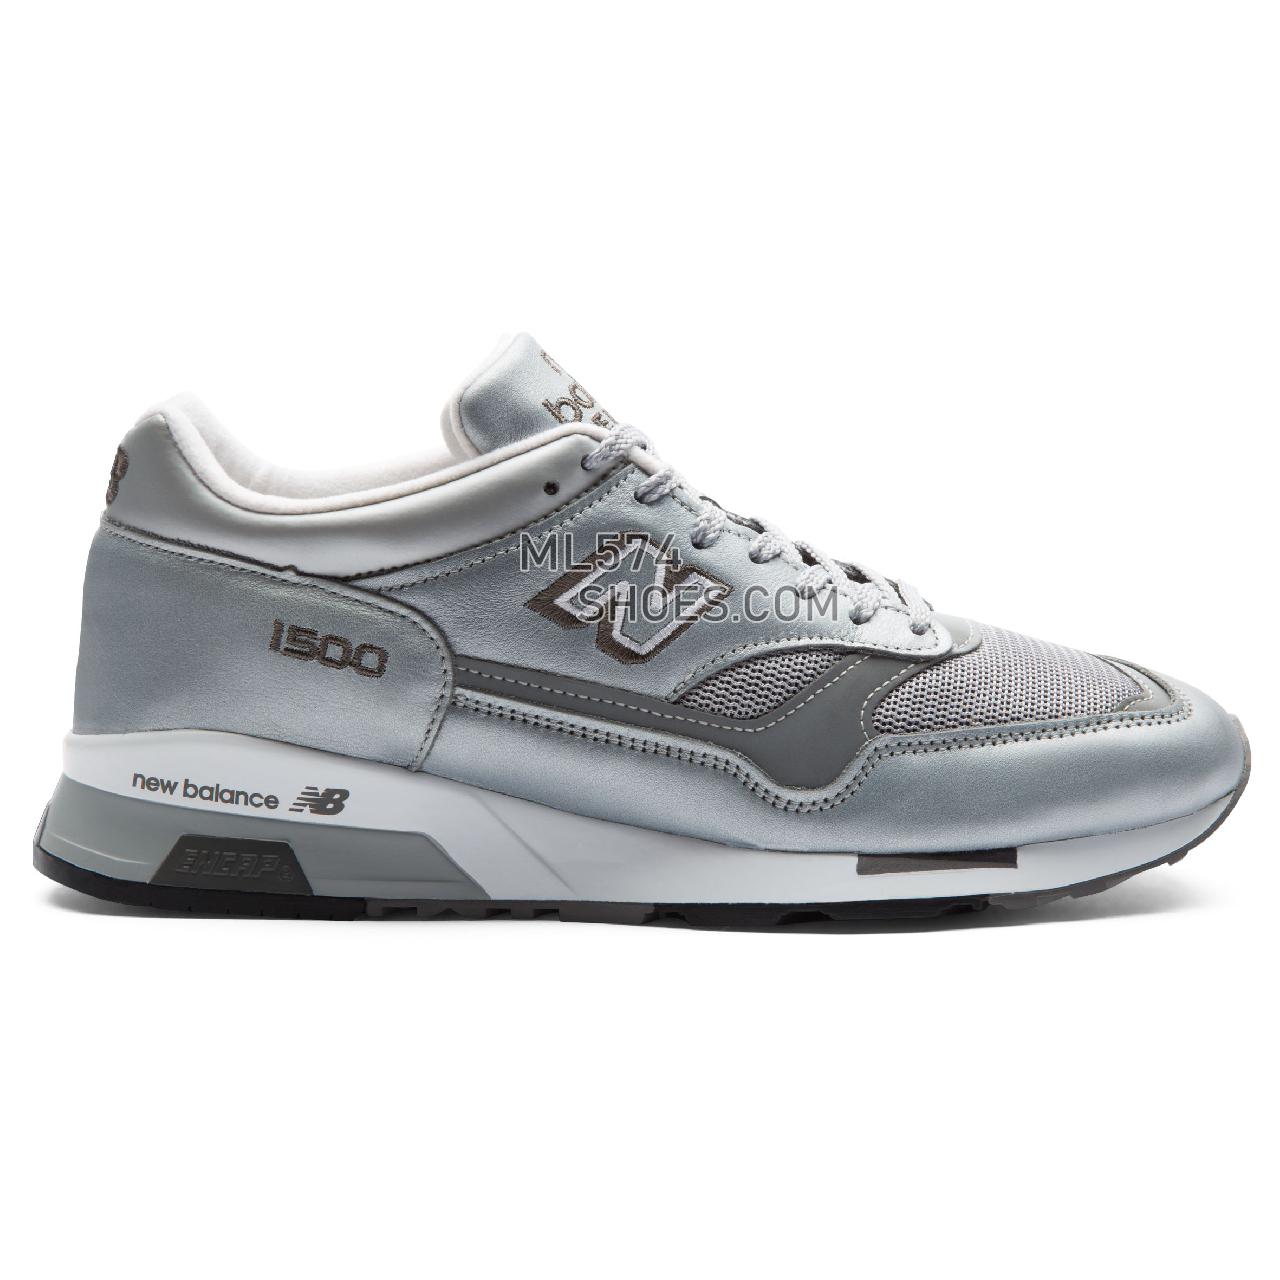 New Balance Made in UK 1500 - Men's 1500 Made in UK Classic M1500-LMEP - Silver with White - M1500JBS